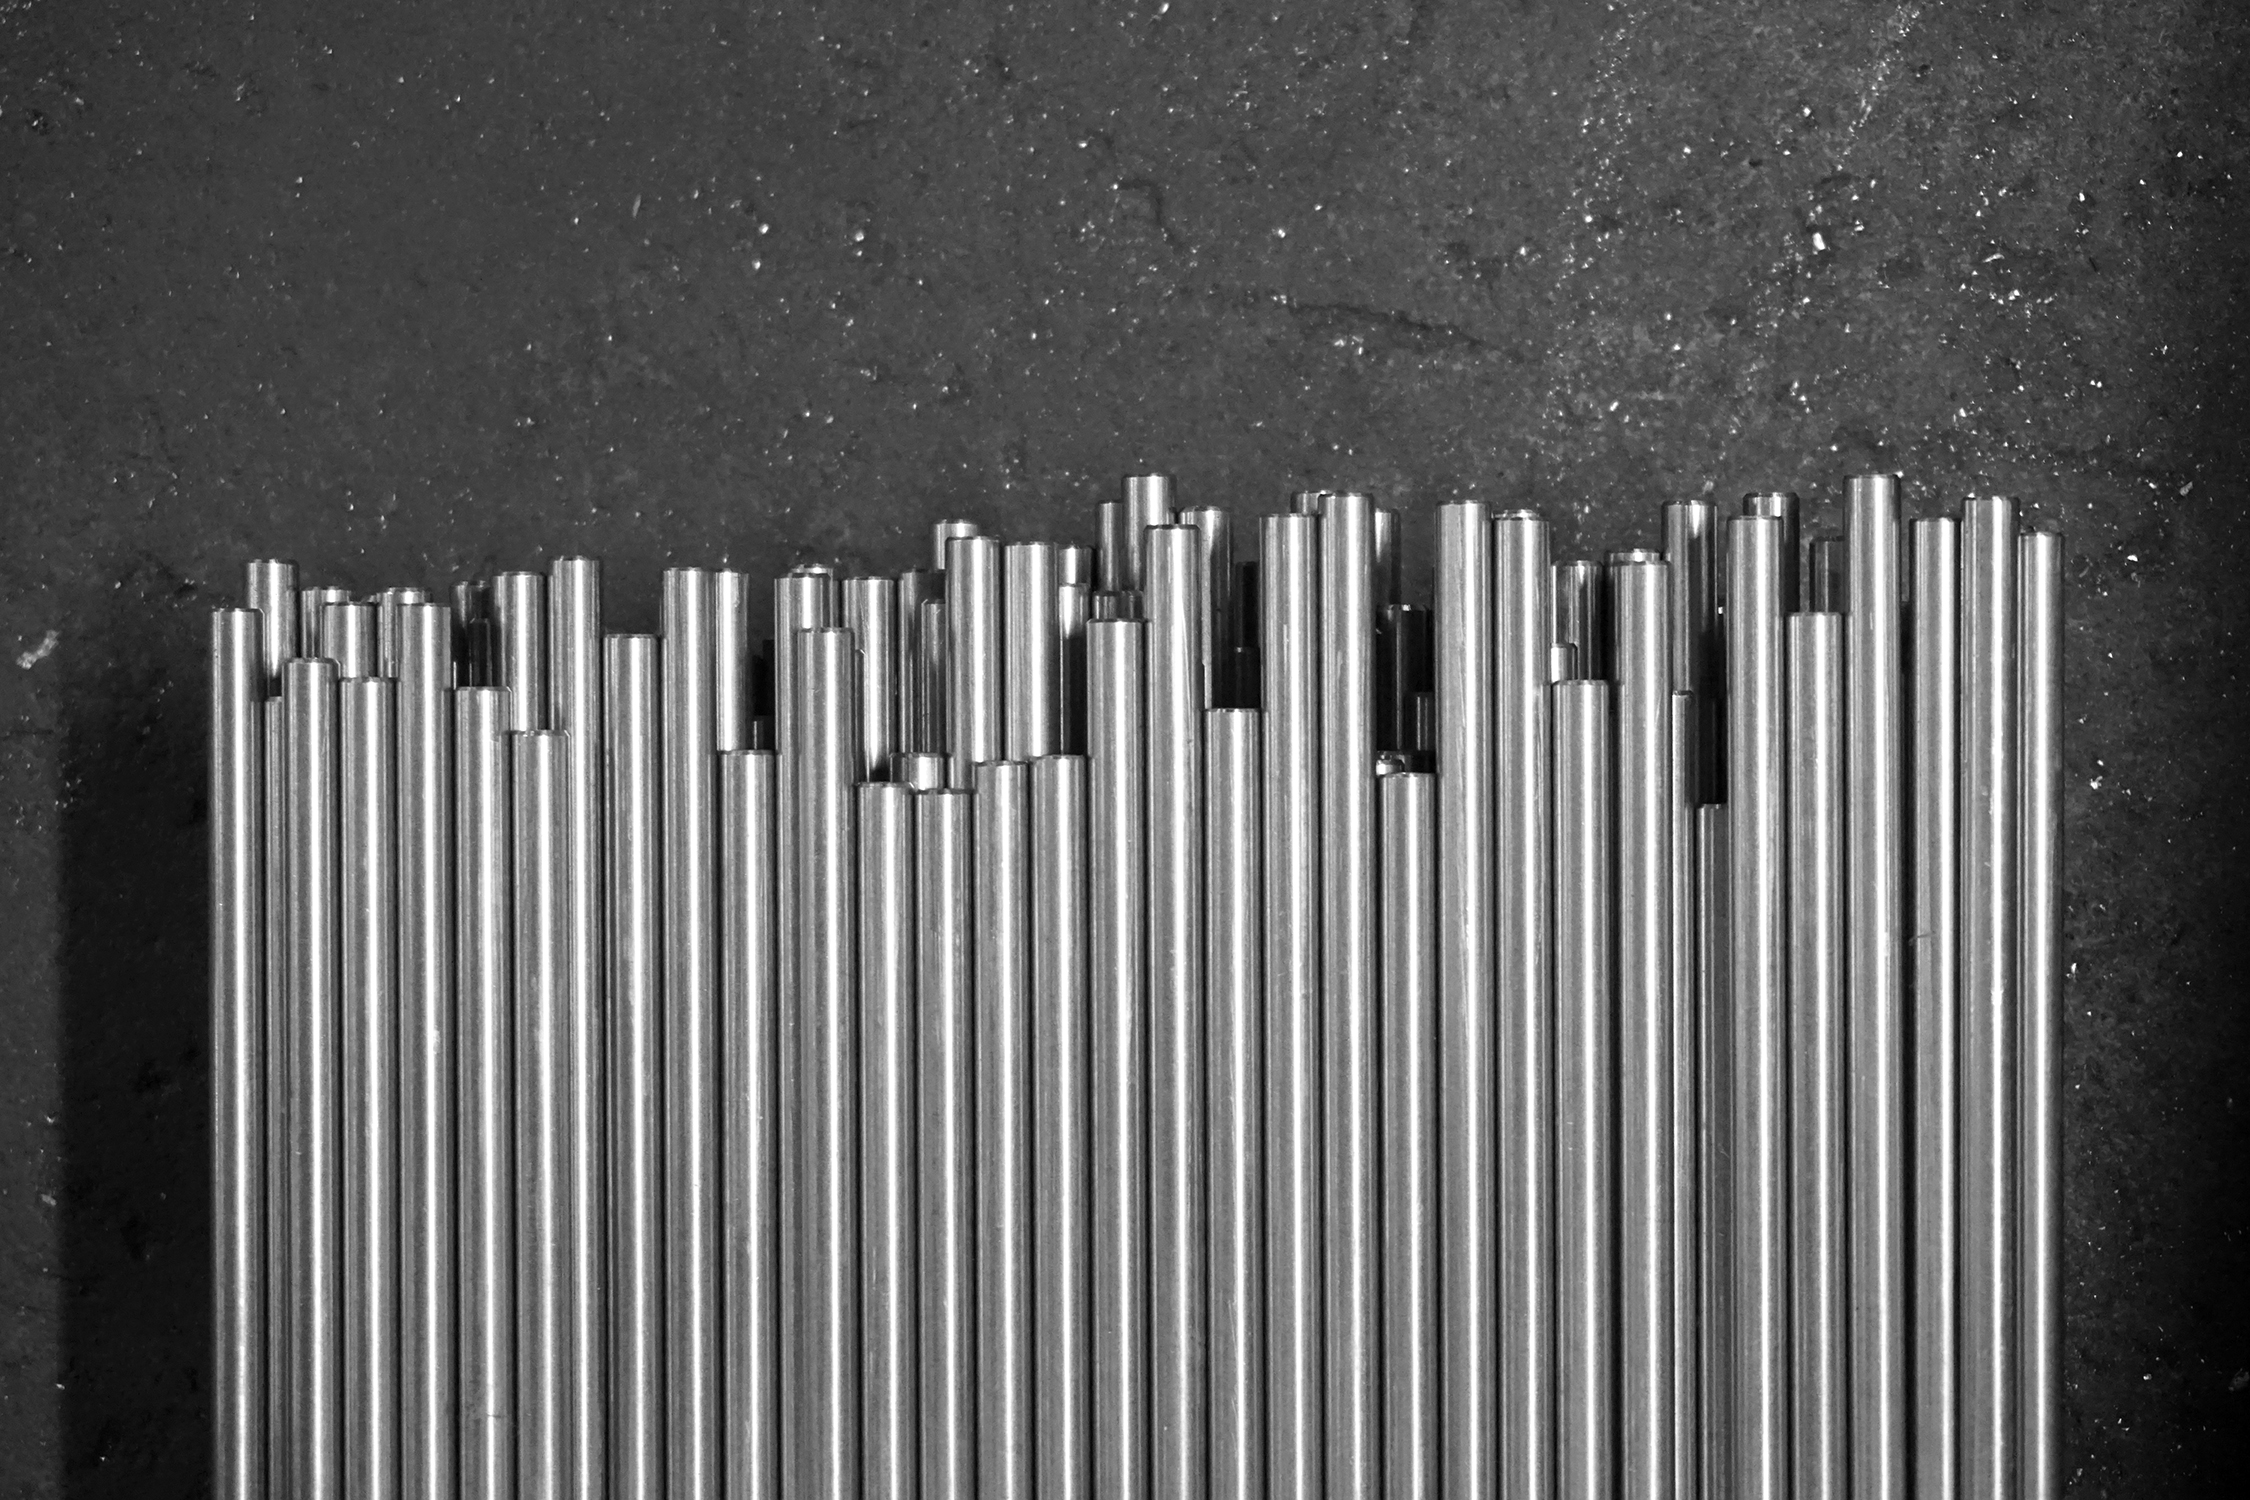 Several stacks of metal rods laying on concrete